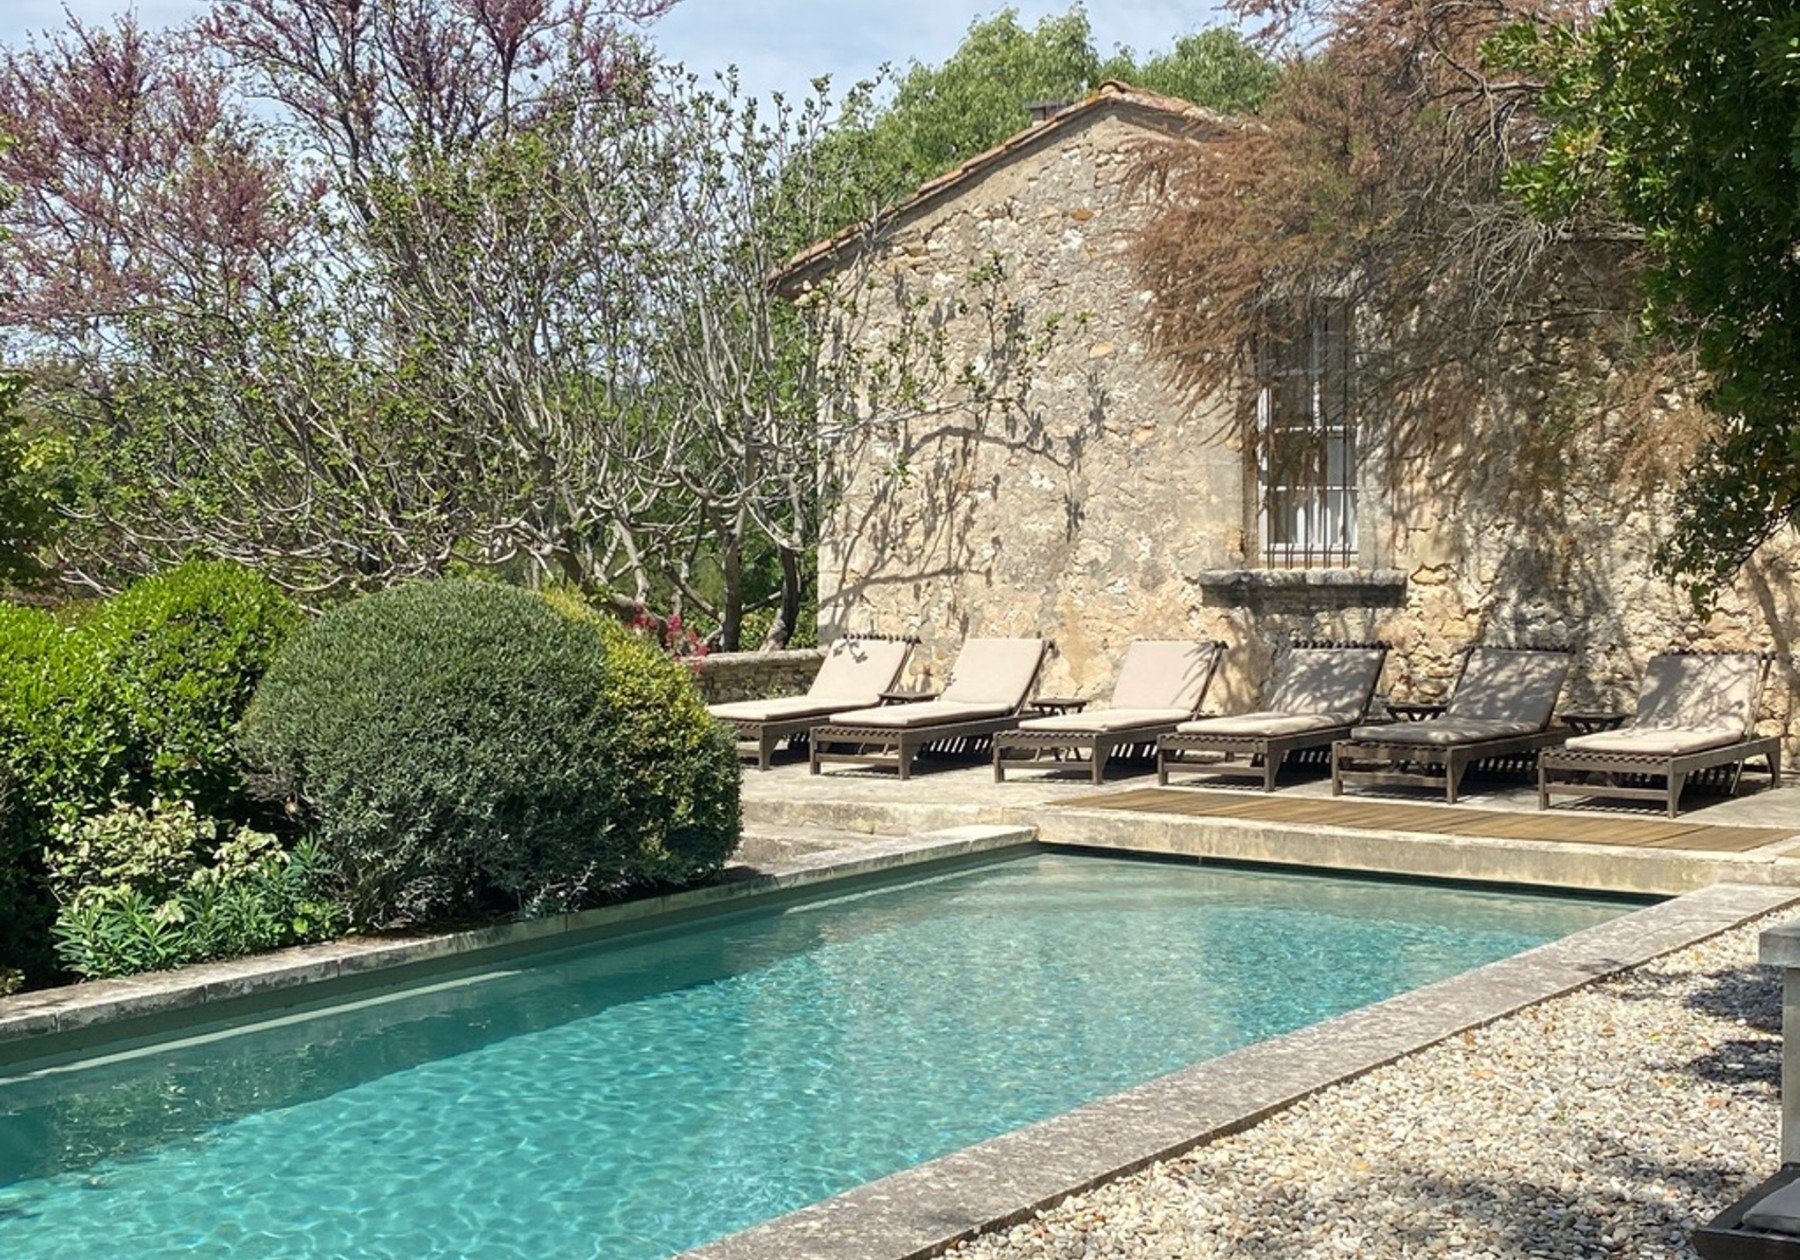 Francis York Dreamy French Bastide in the Golden Triangle of the Luberon 3.jpeg